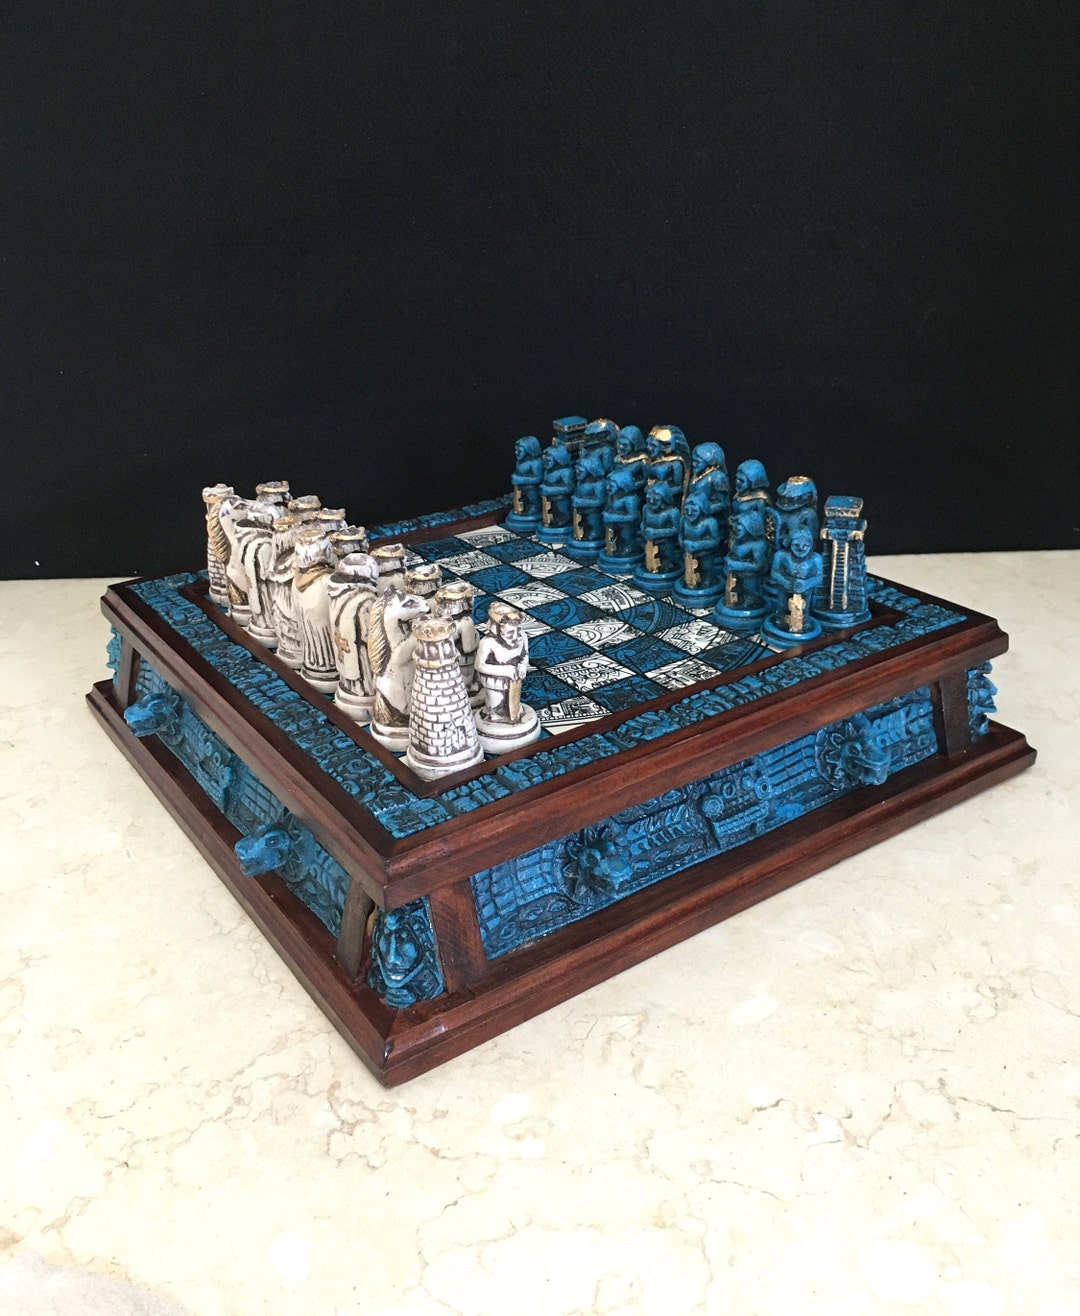 Handmade Wooden Chess Set Luxury Stone and Resin Chess Pieces - Etsy